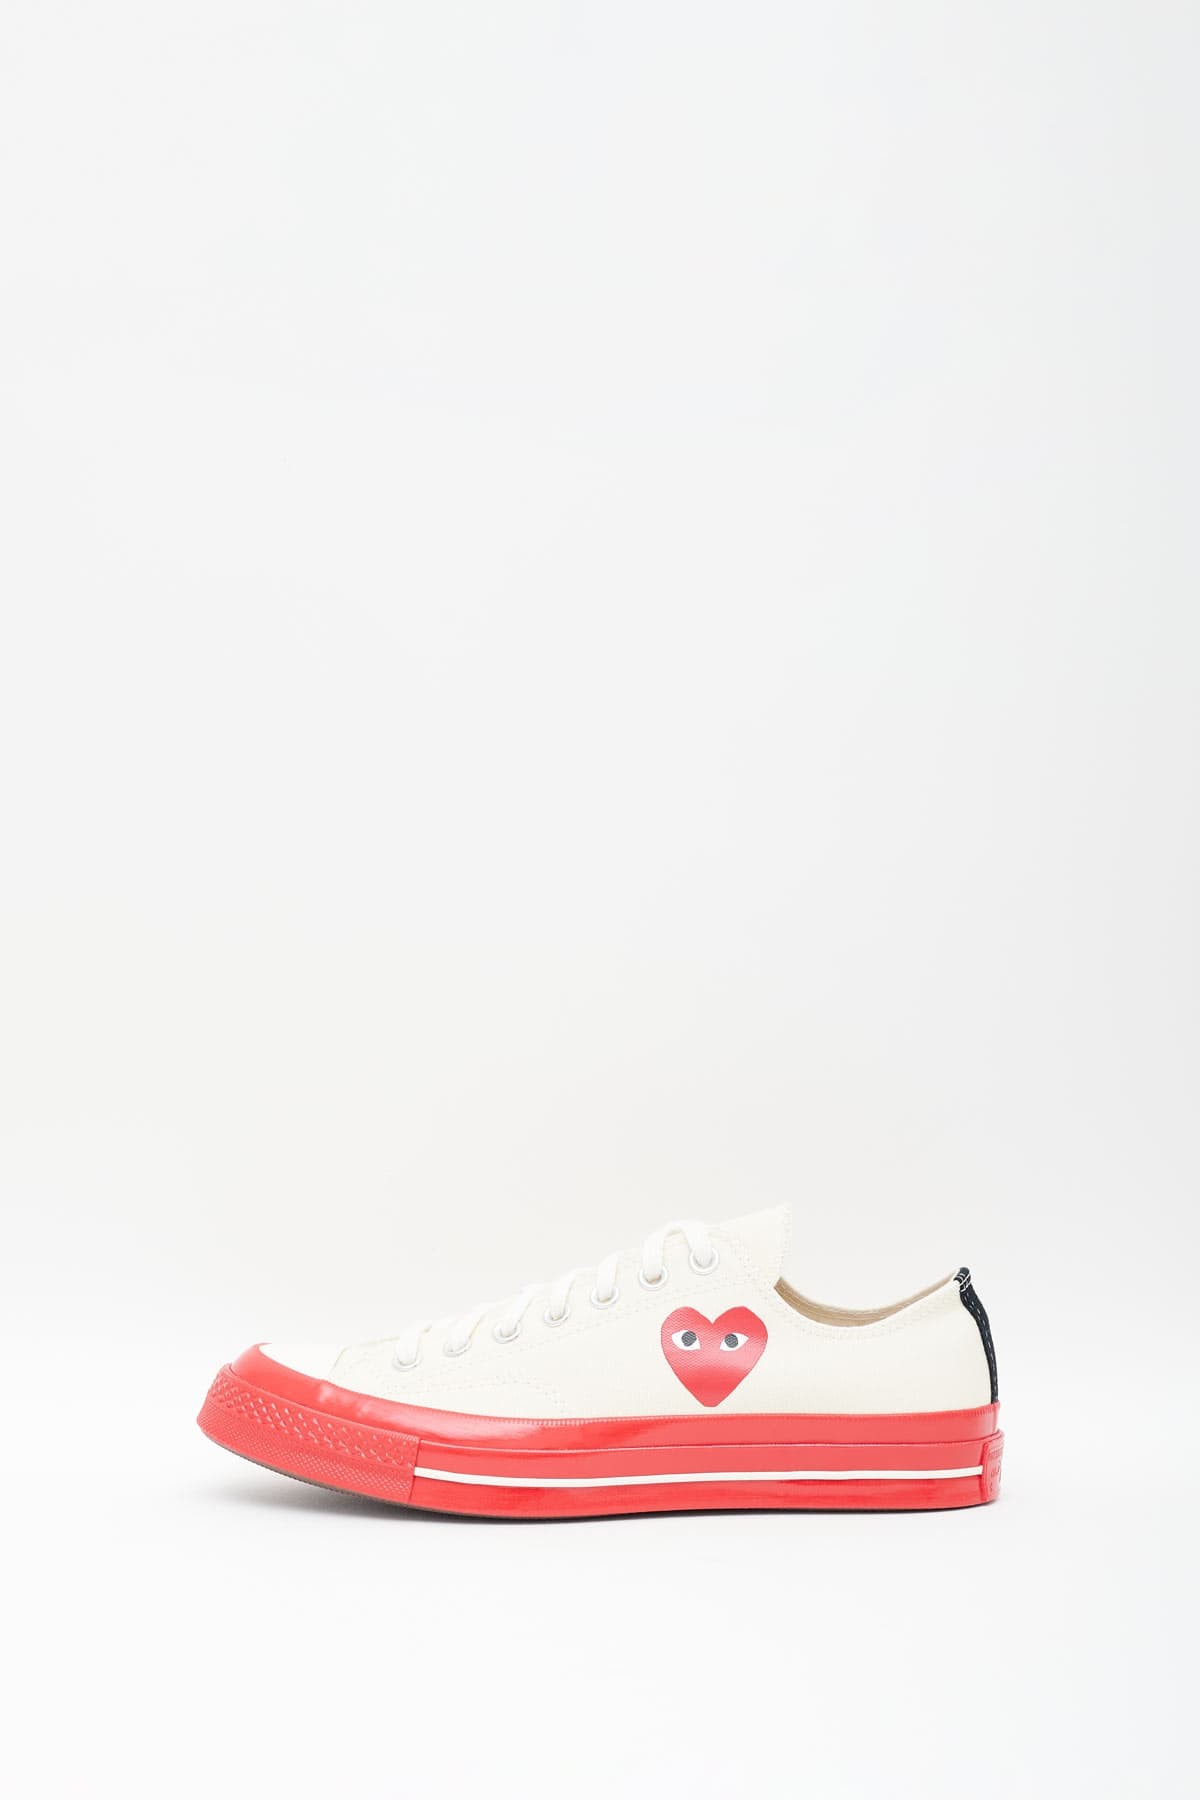 COMME DES GARCONS PLAY CONVERSE WHITE P1K123 CHUCK TAYLOR 70 LOW SNEAKERS IAMNUE